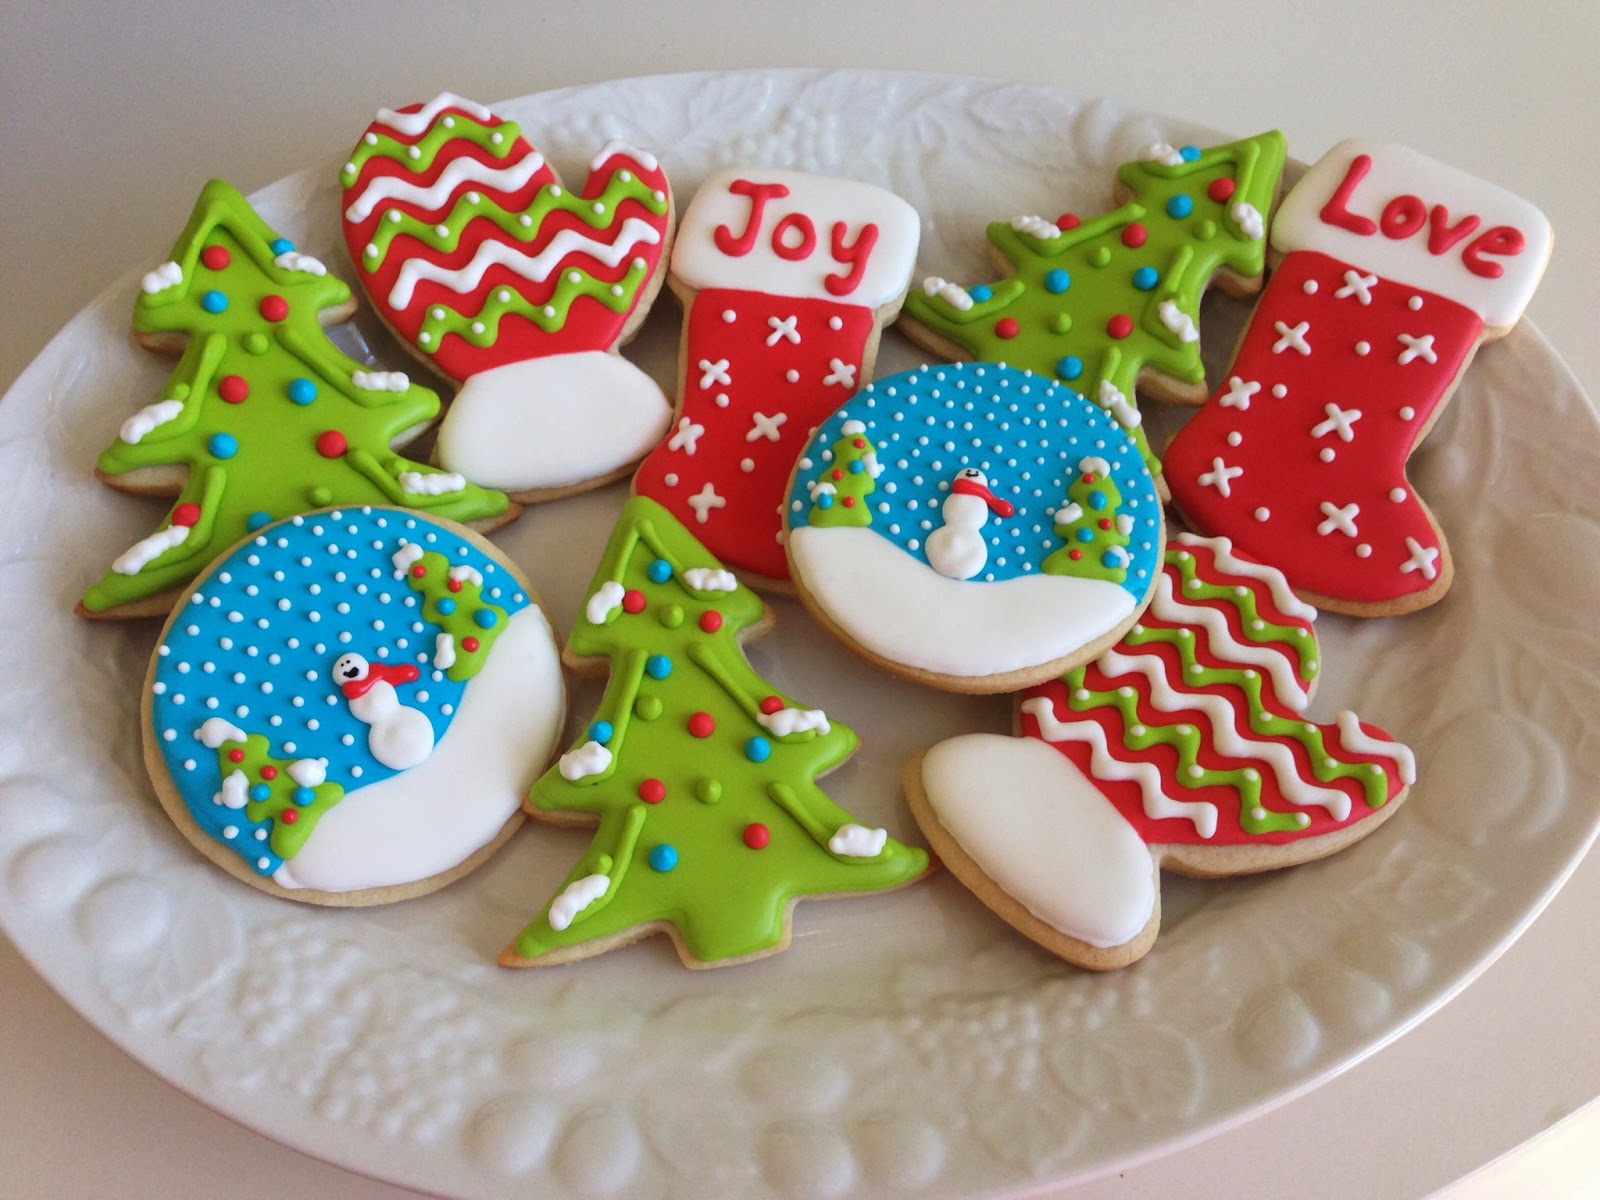 monograms & cake: Christmas Cut-Out Sugar Cookies with ...